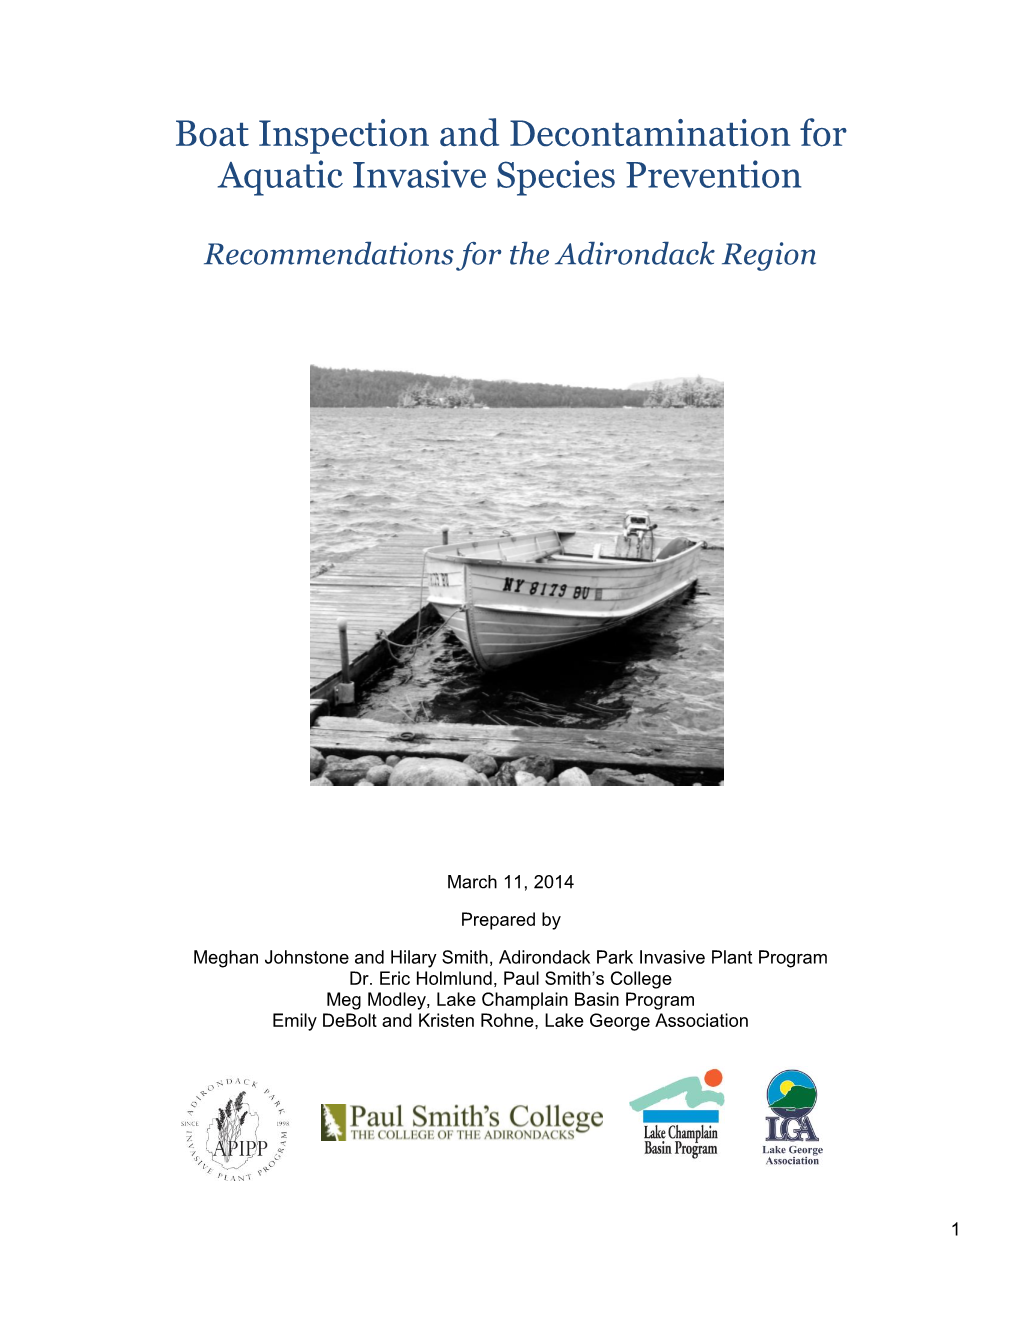 Boat Inspection and Decontamination for Aquatic Invasive Species Prevention